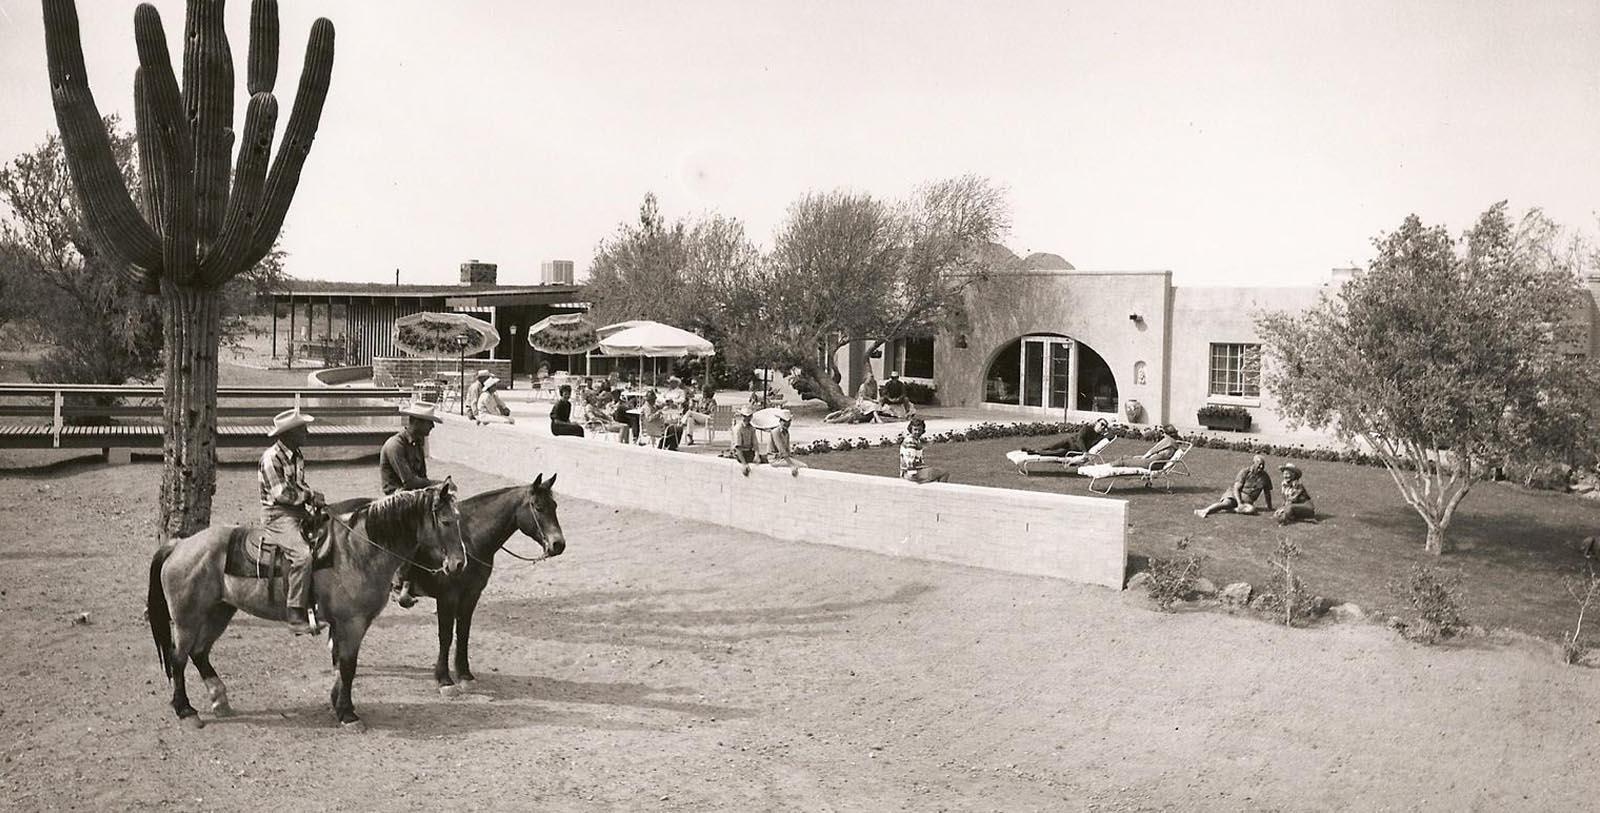 Historic image of White Stallion Ranch, 1900, Member of Historic Hotels of America, in Tuscan, Arizona, Discover